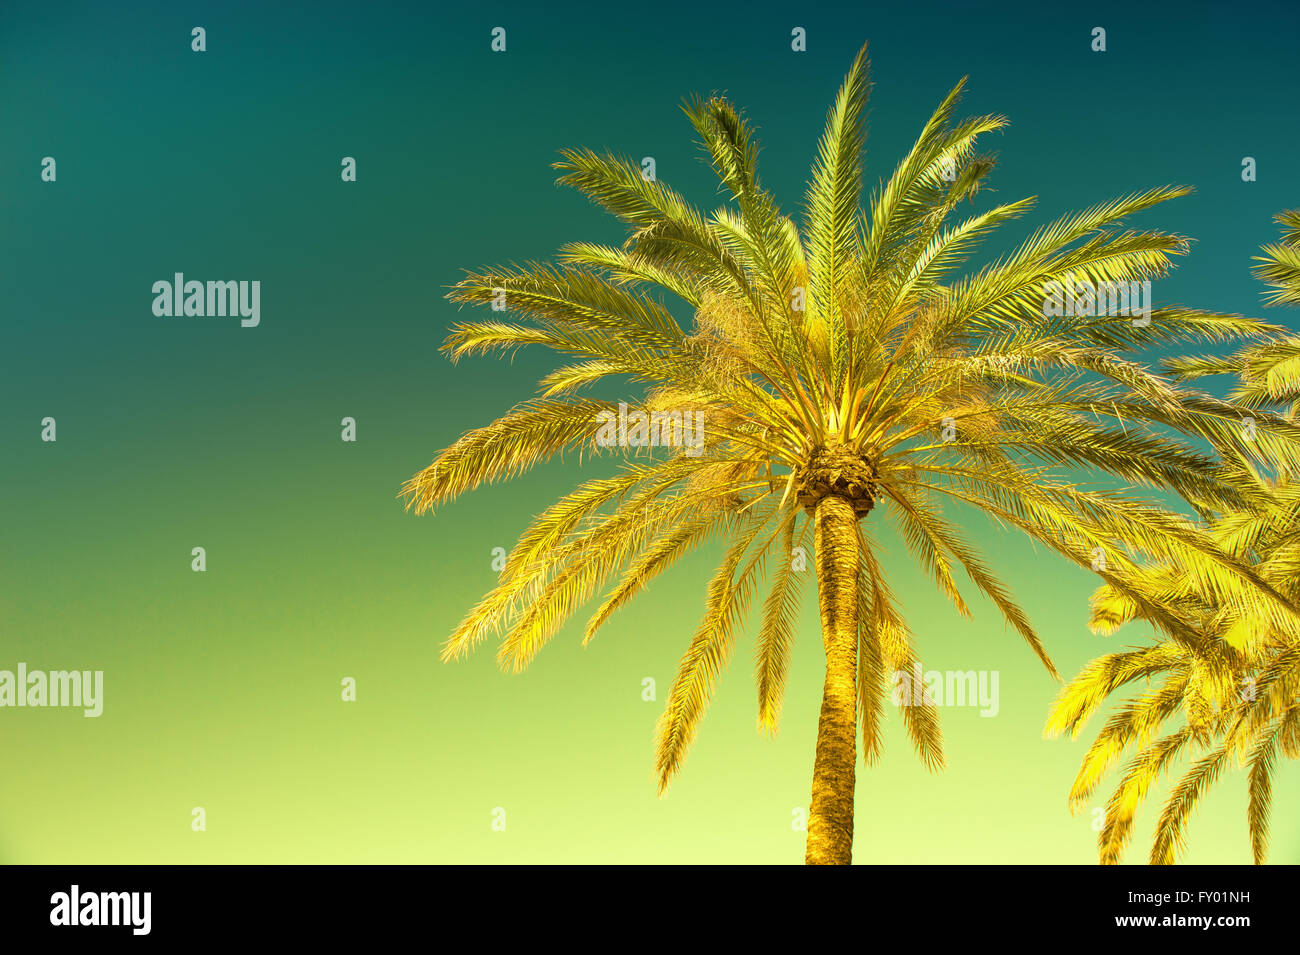 Green palm tree against sunny blue sky. Summer holidays background. Vintage style toned picture Stock Photo